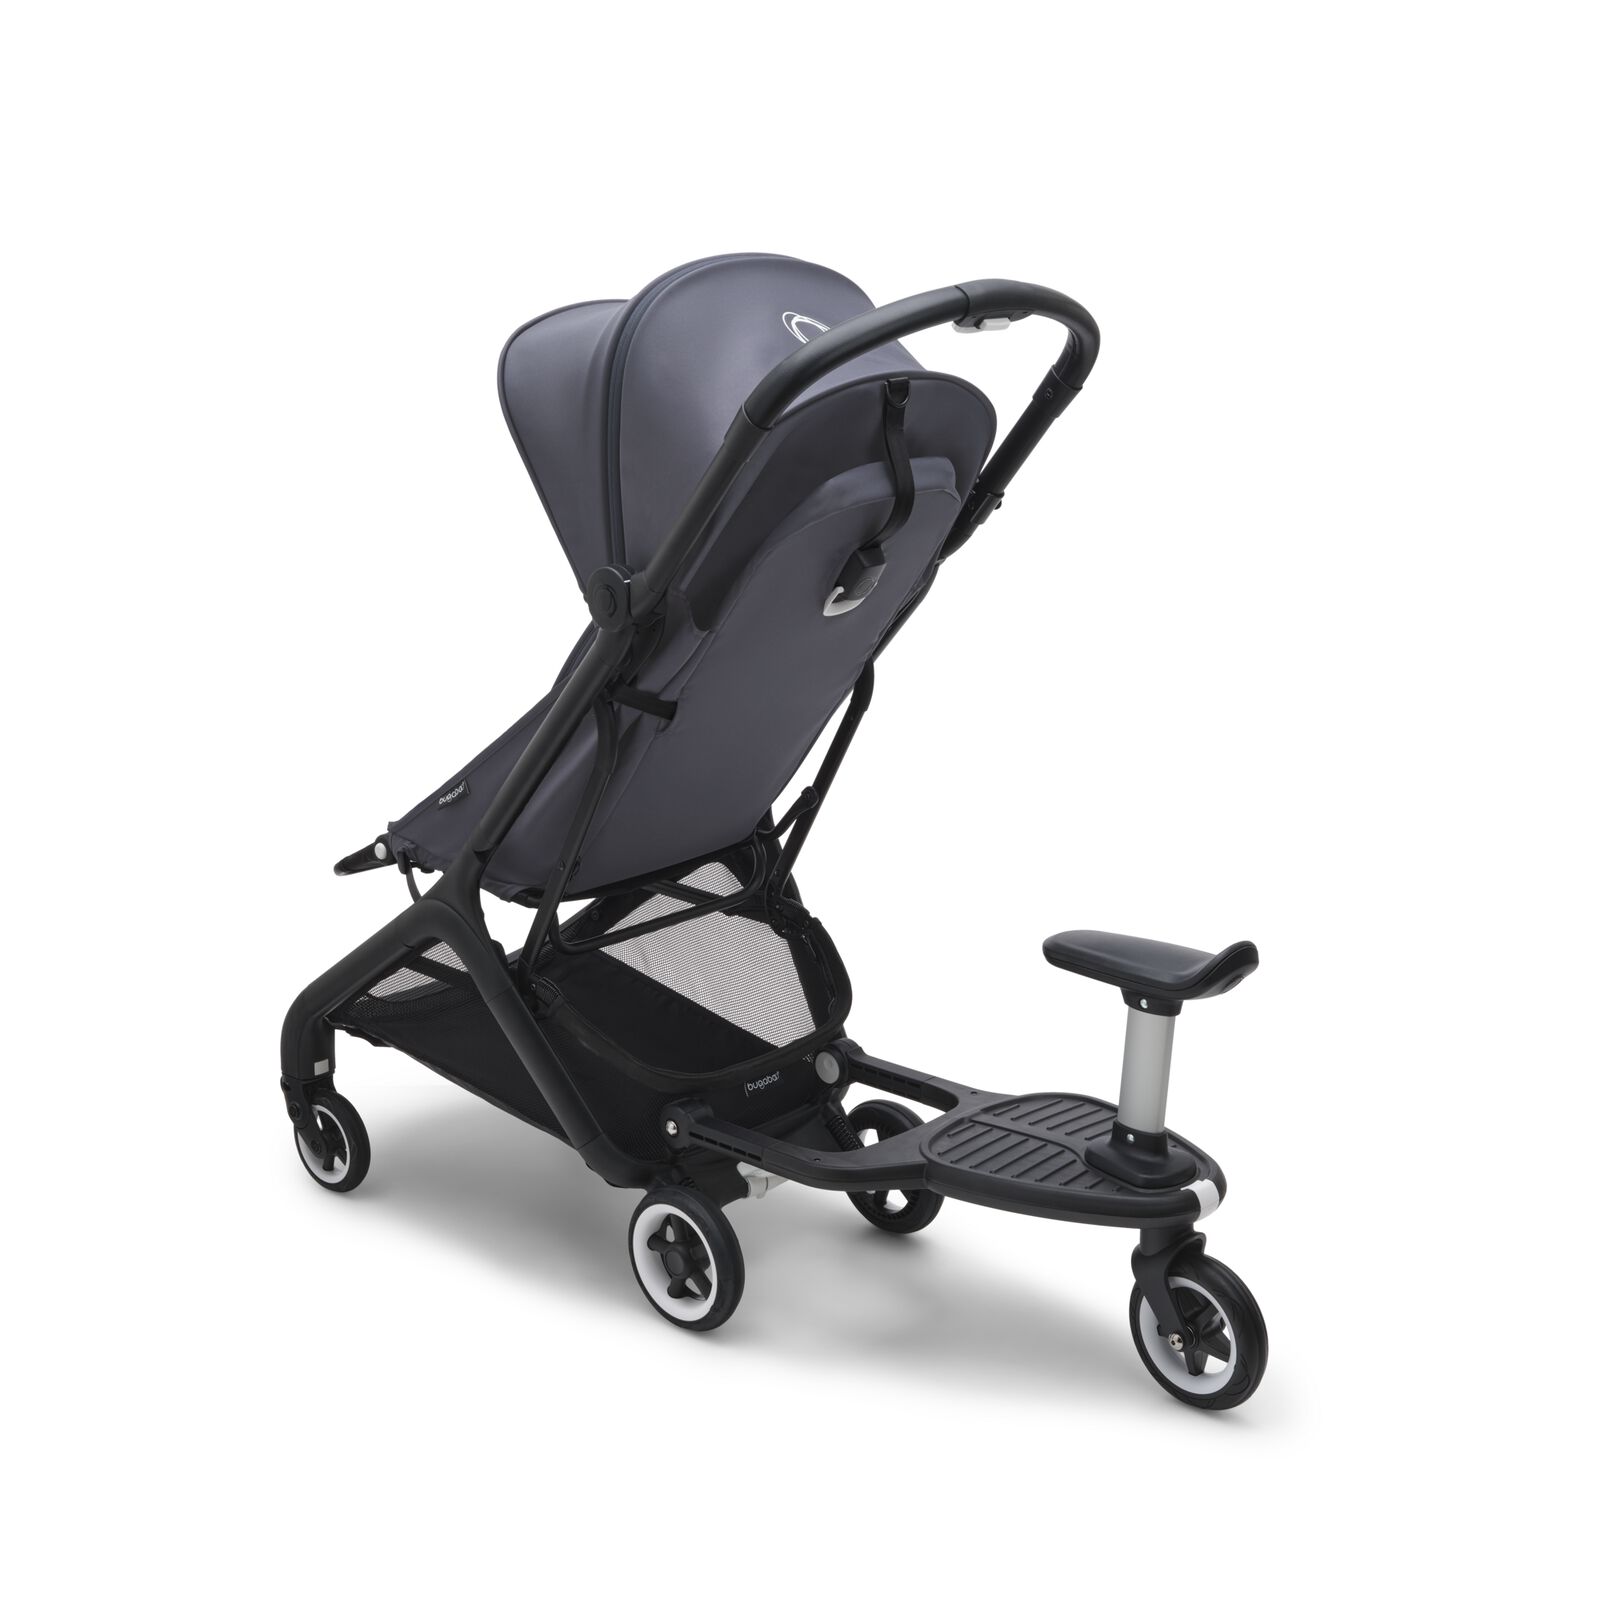 Bugaboo Butterfly comfort wheeled board + without seat.